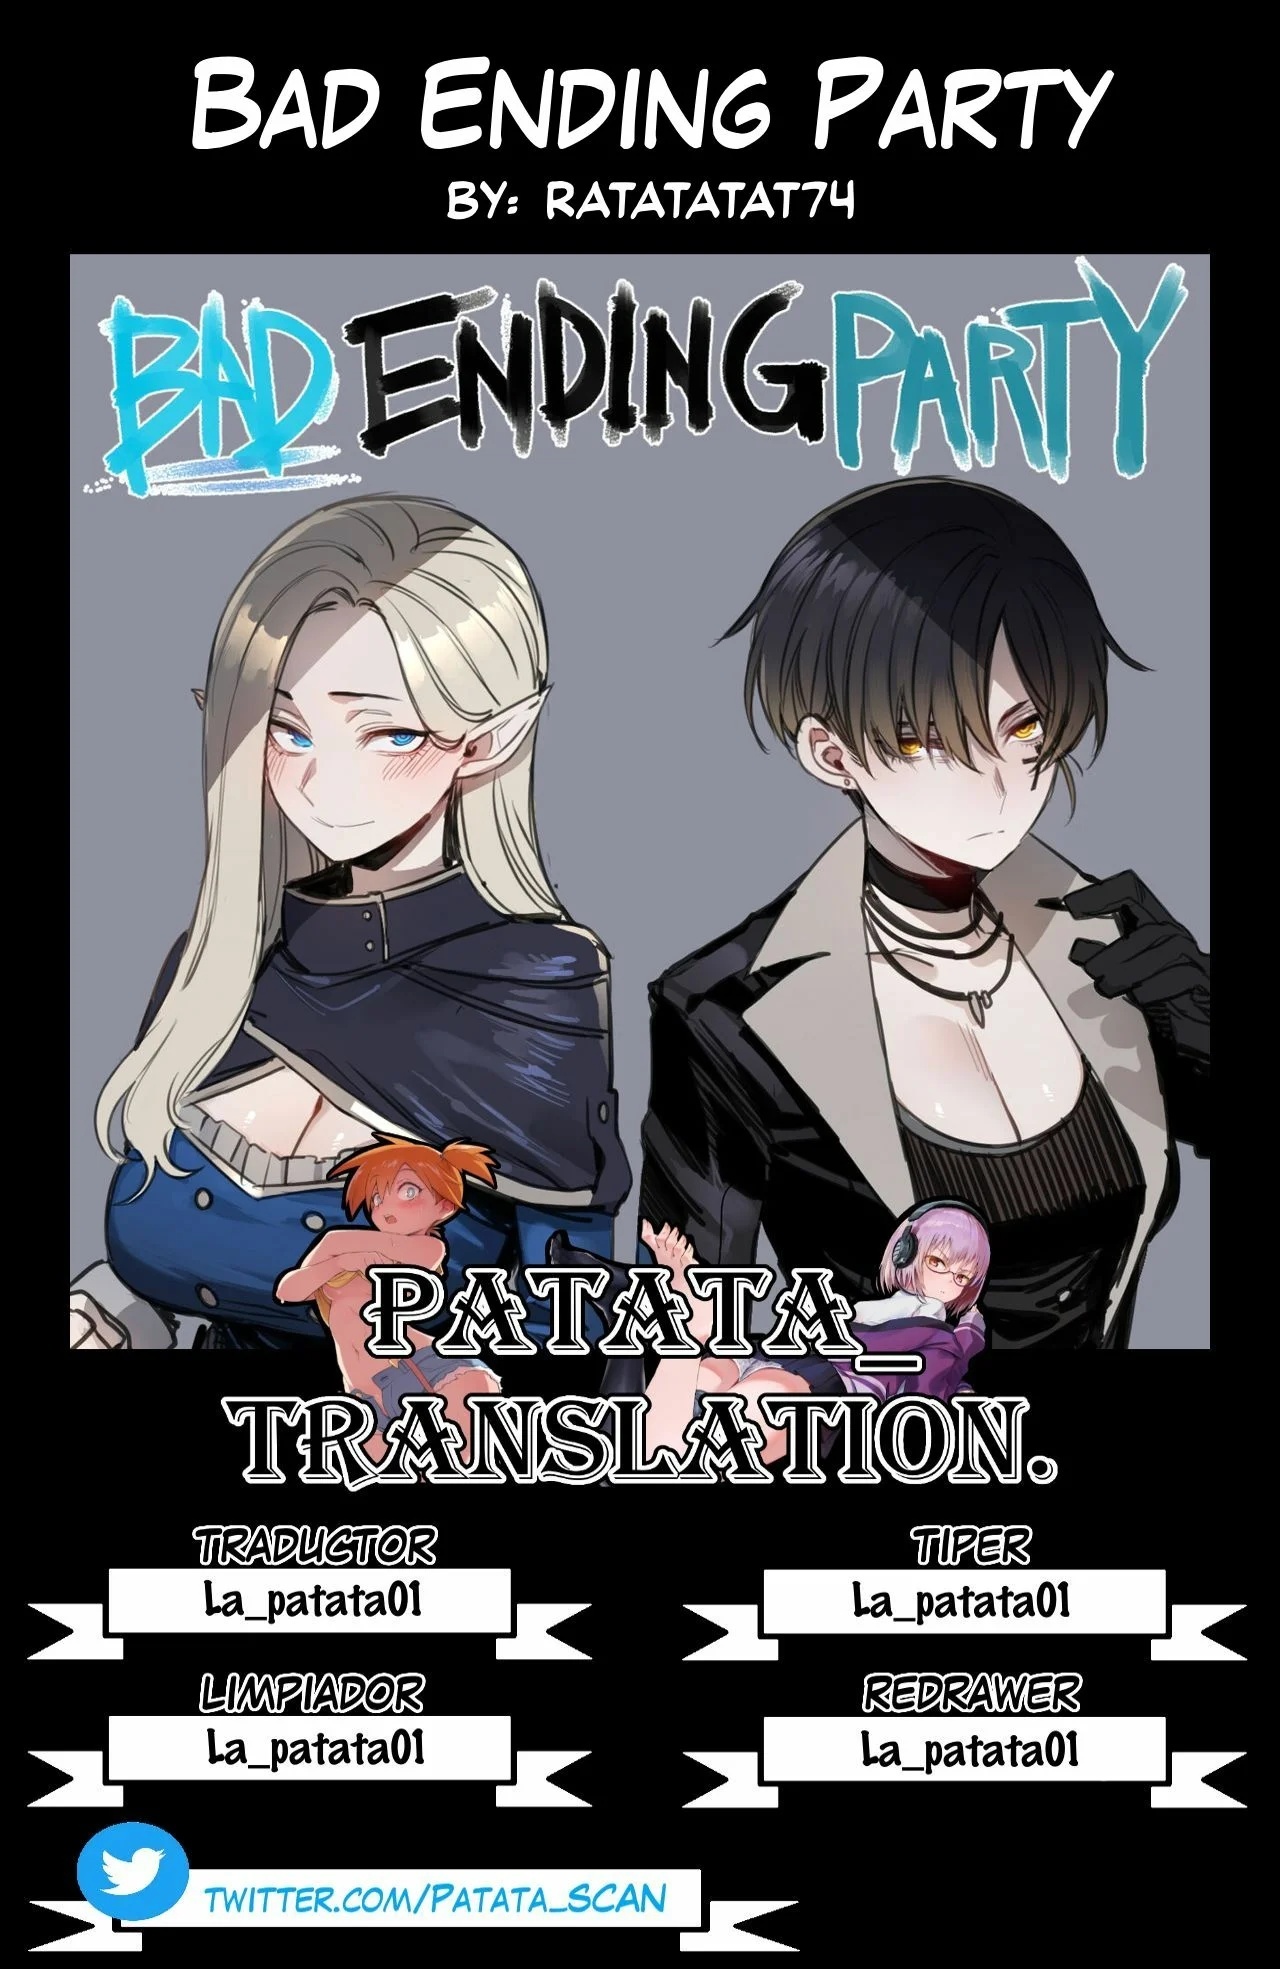 Bad ending party - 0